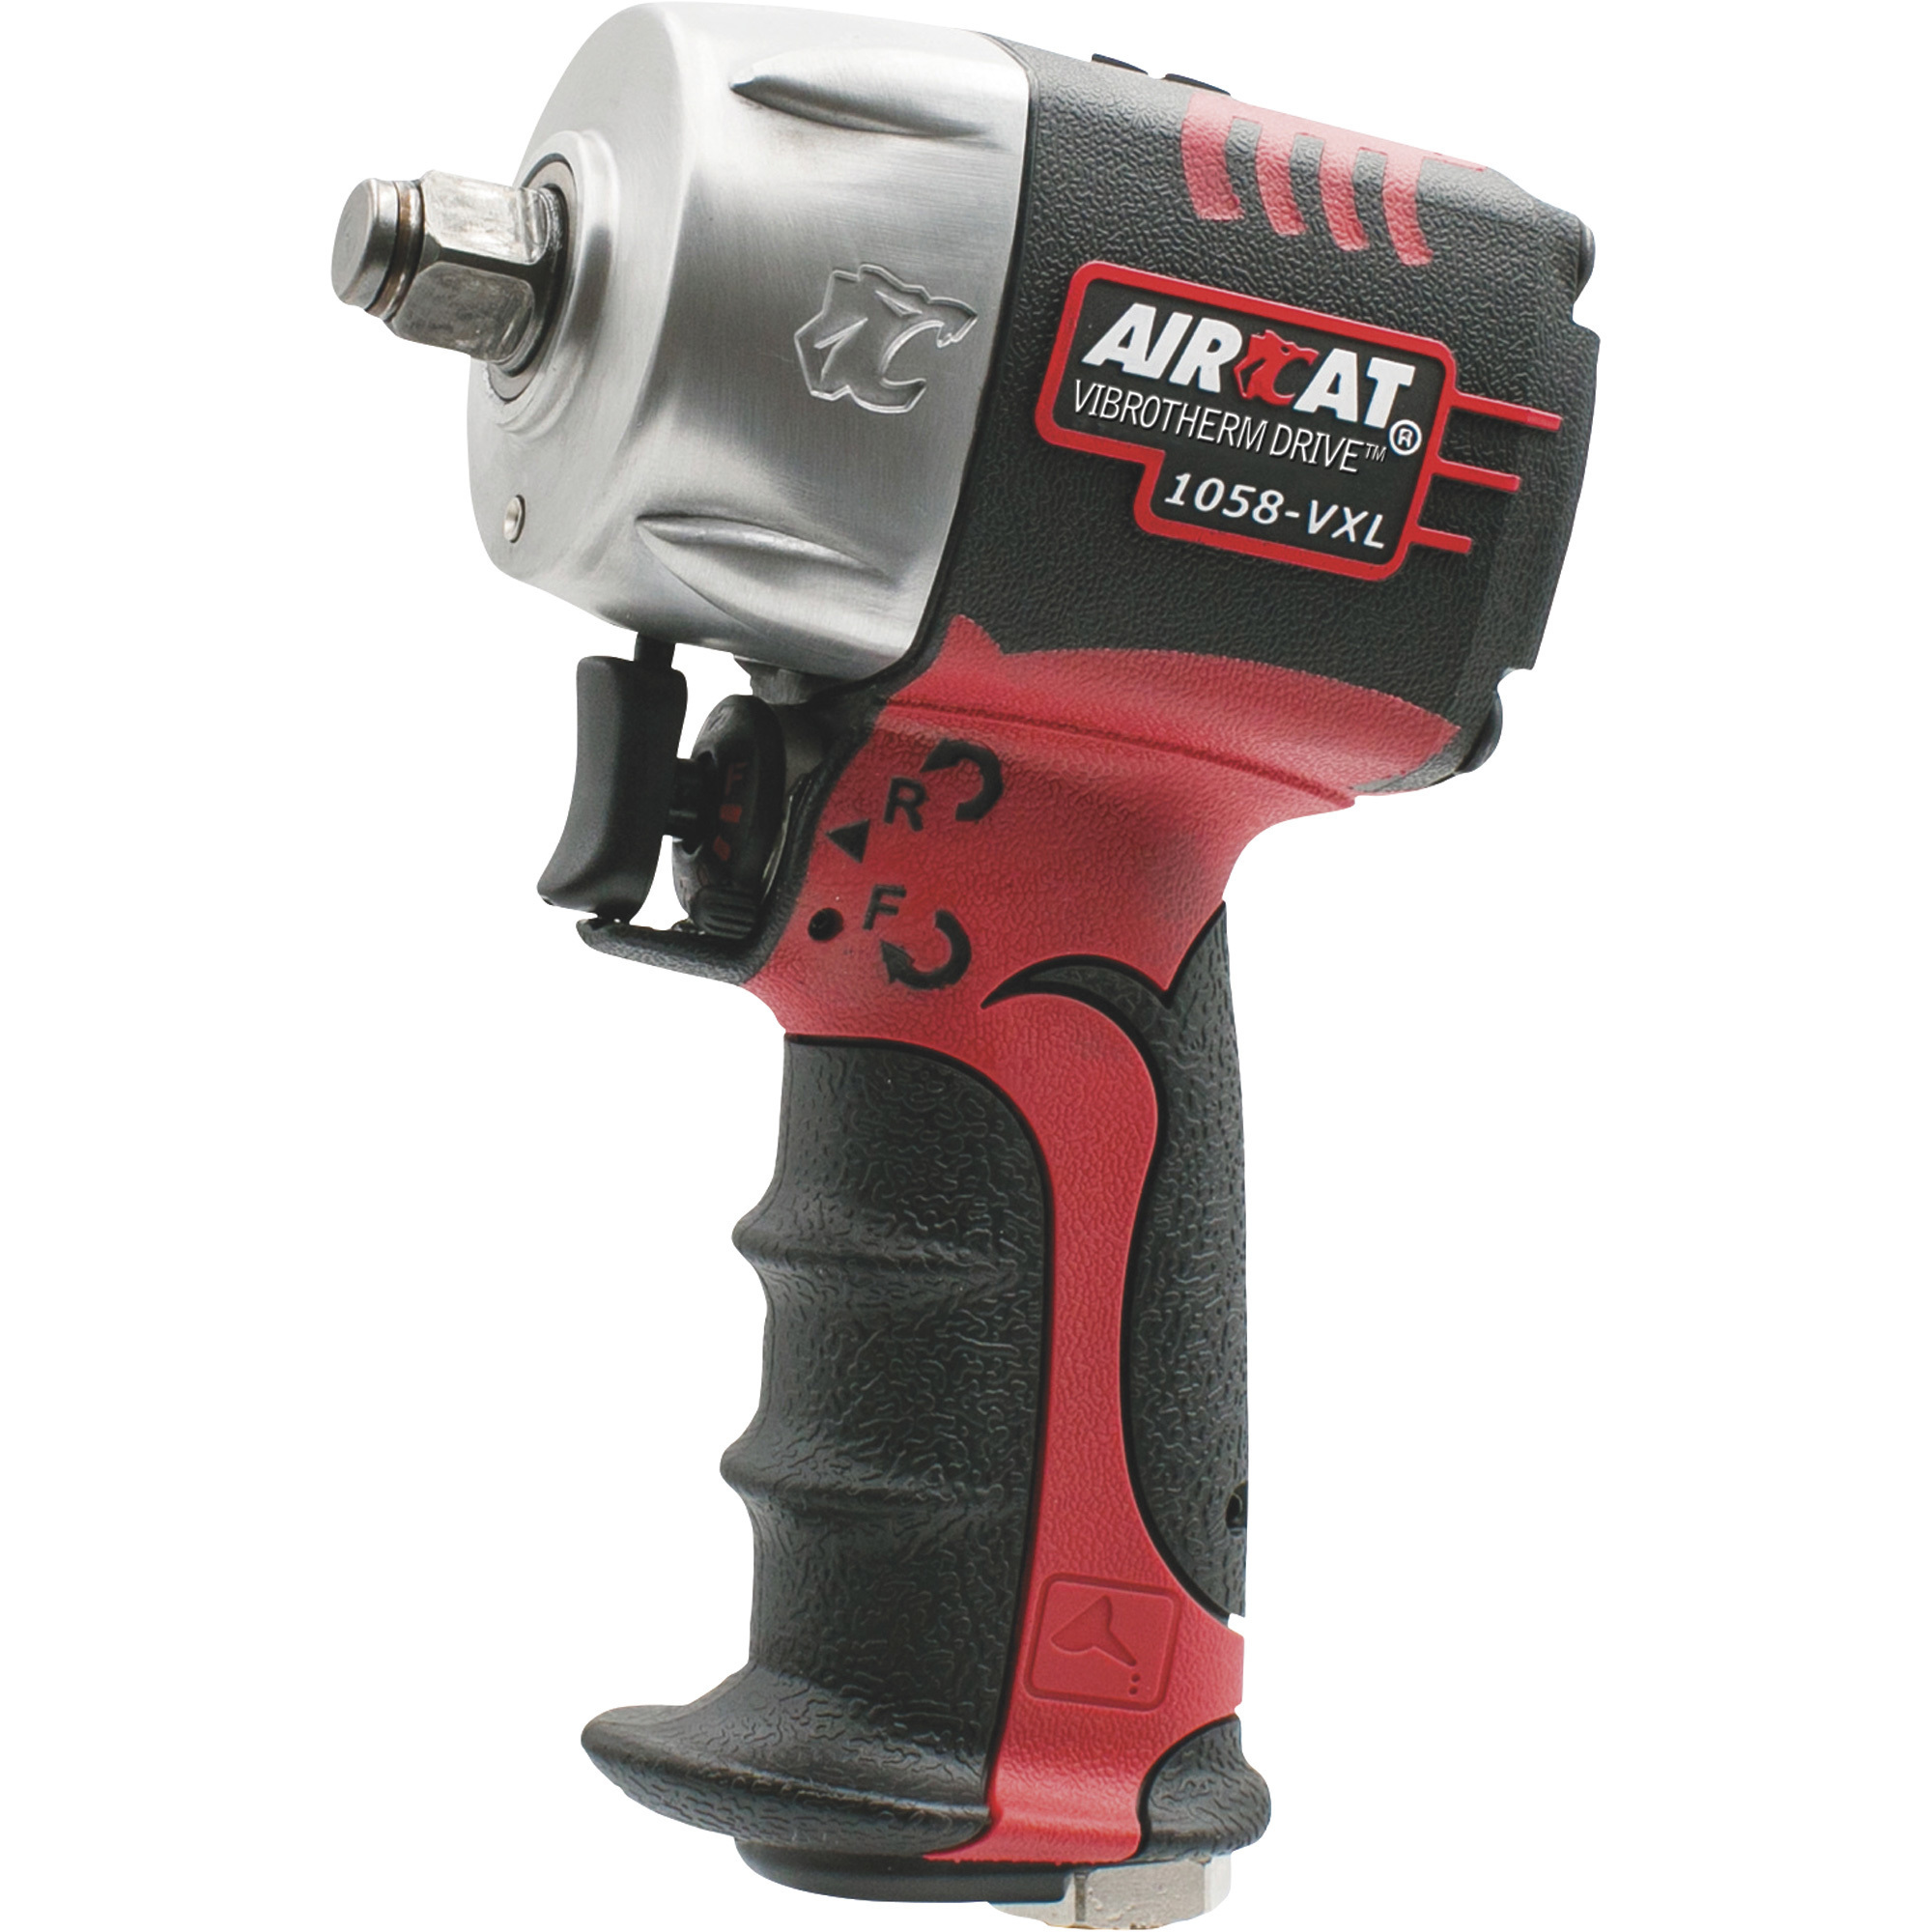 AIRCAT Vibrotherm Drive Compact Composite Air Impact Wrench, 1/2Inch Drive, 770ft./lbs. Torque, Model 1058-VXL